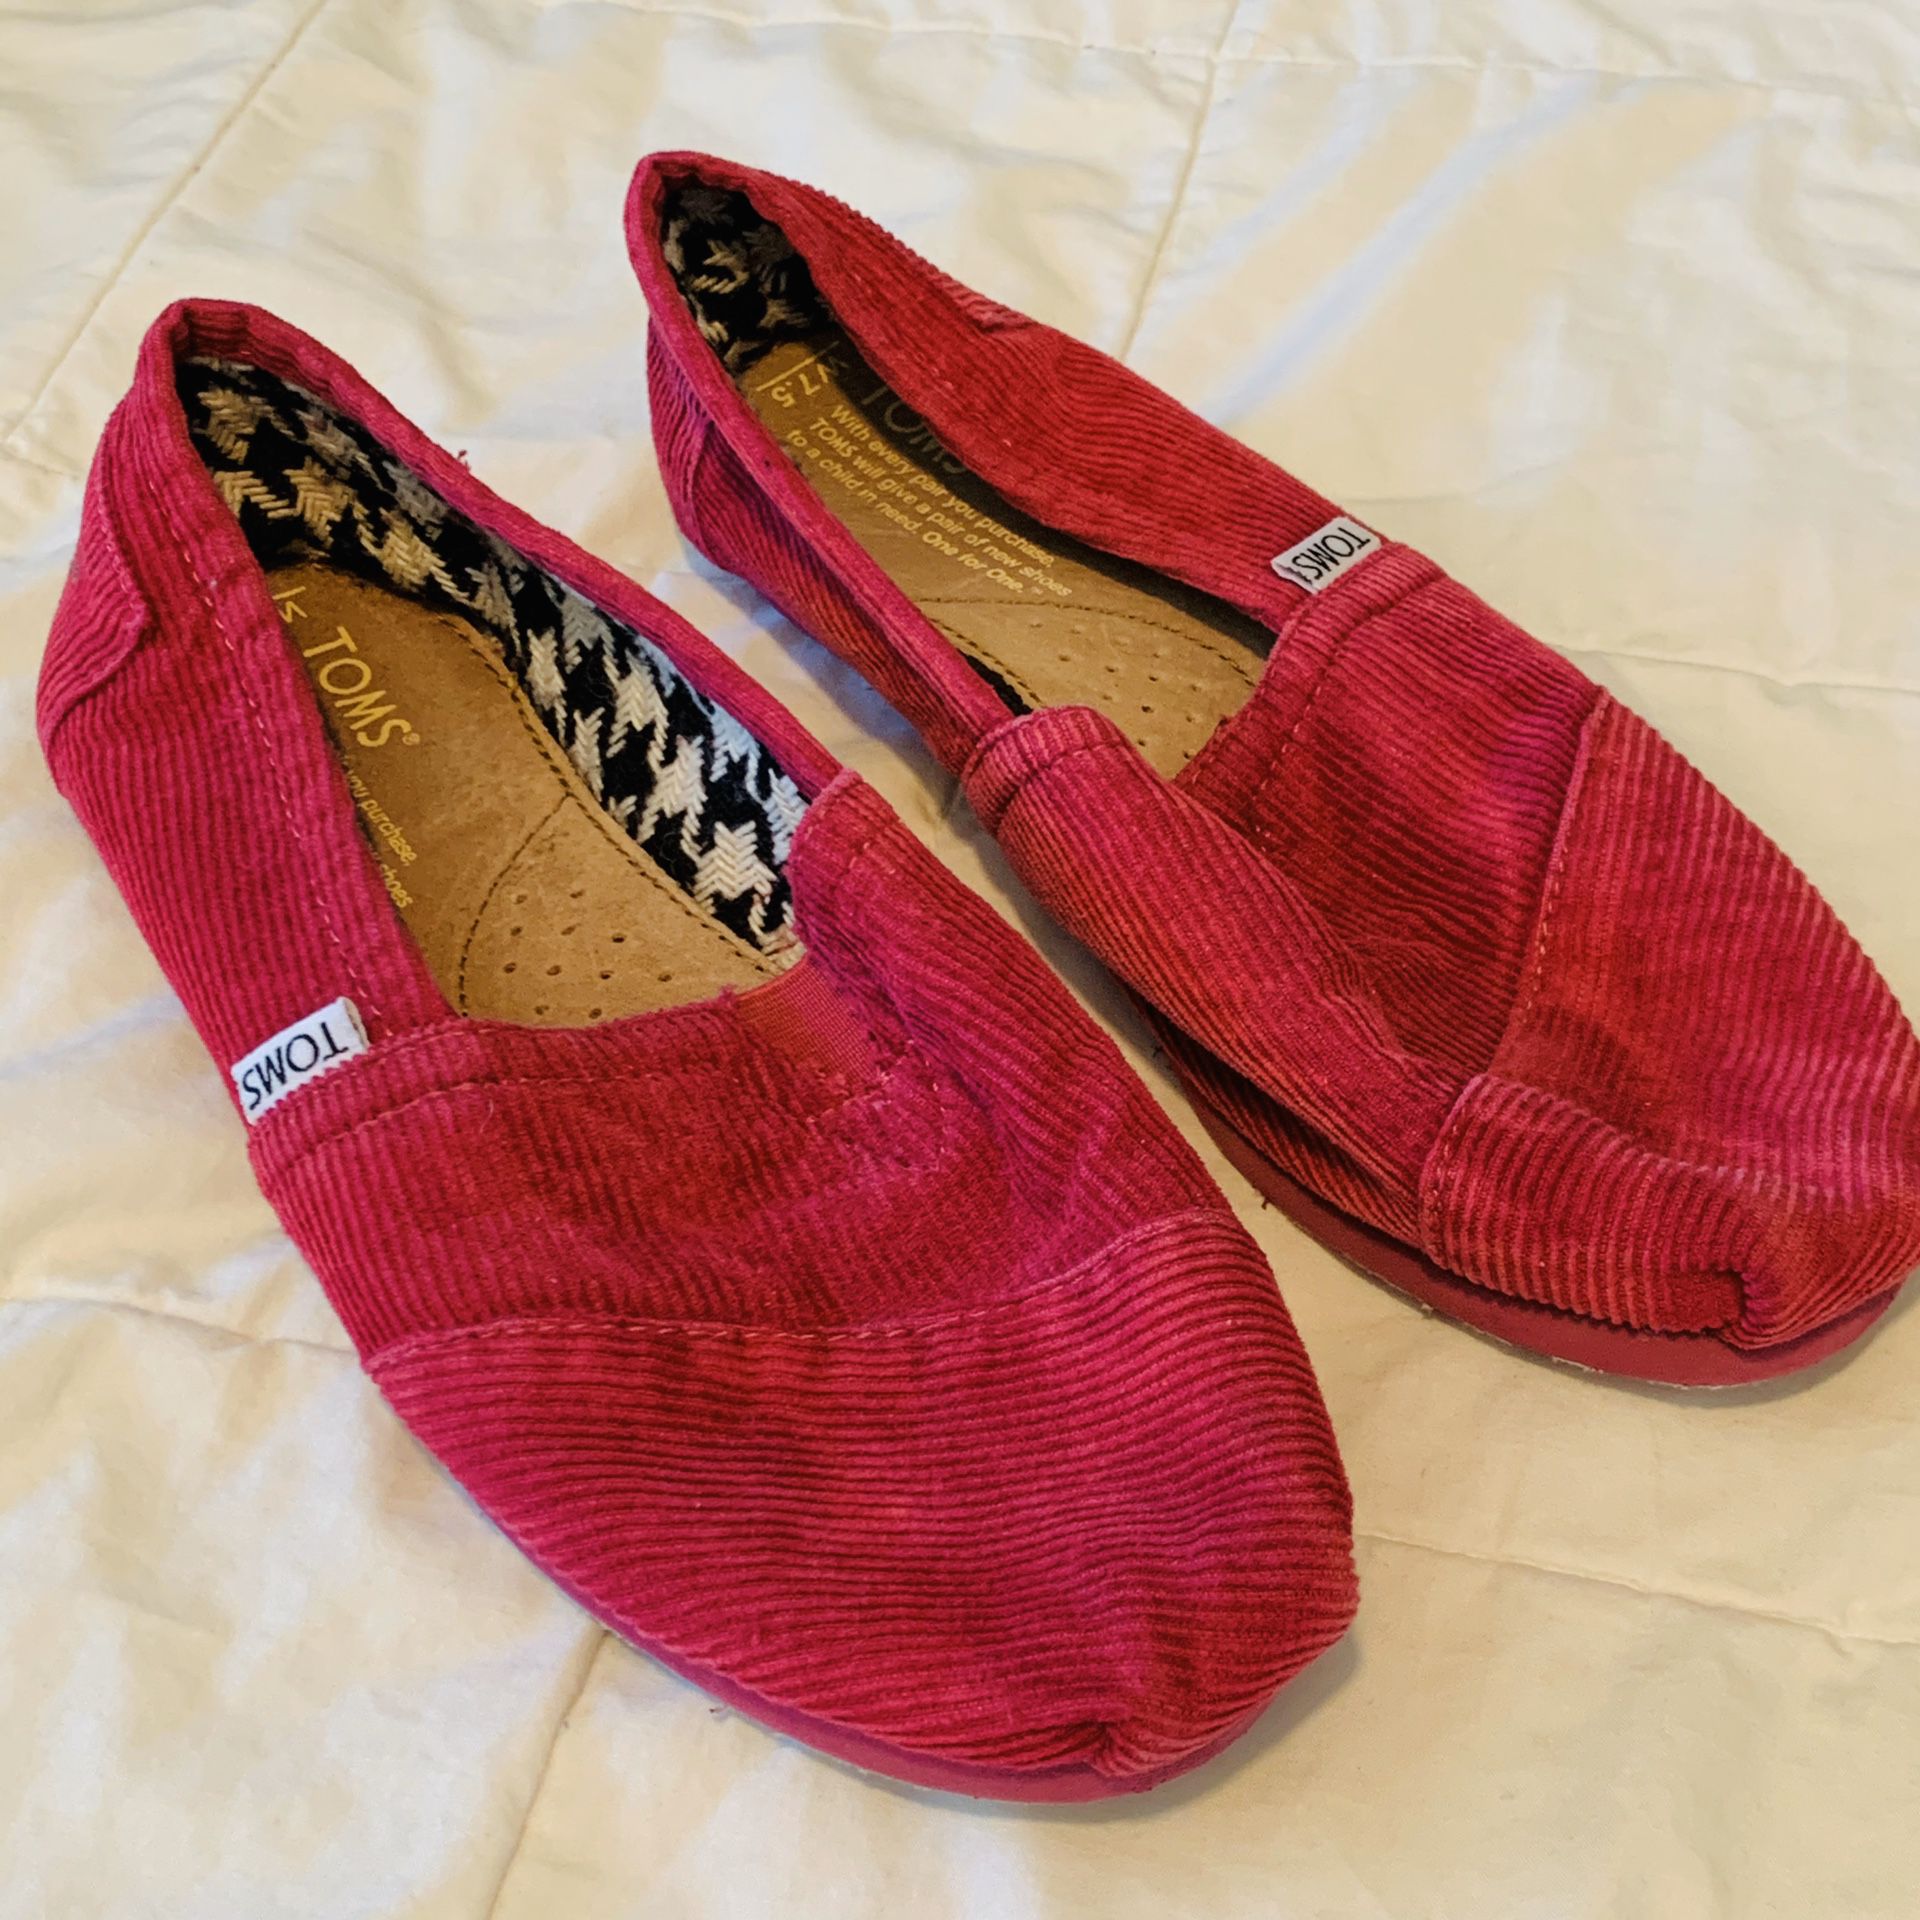 Size 7.5 women’s toms slip on shoes